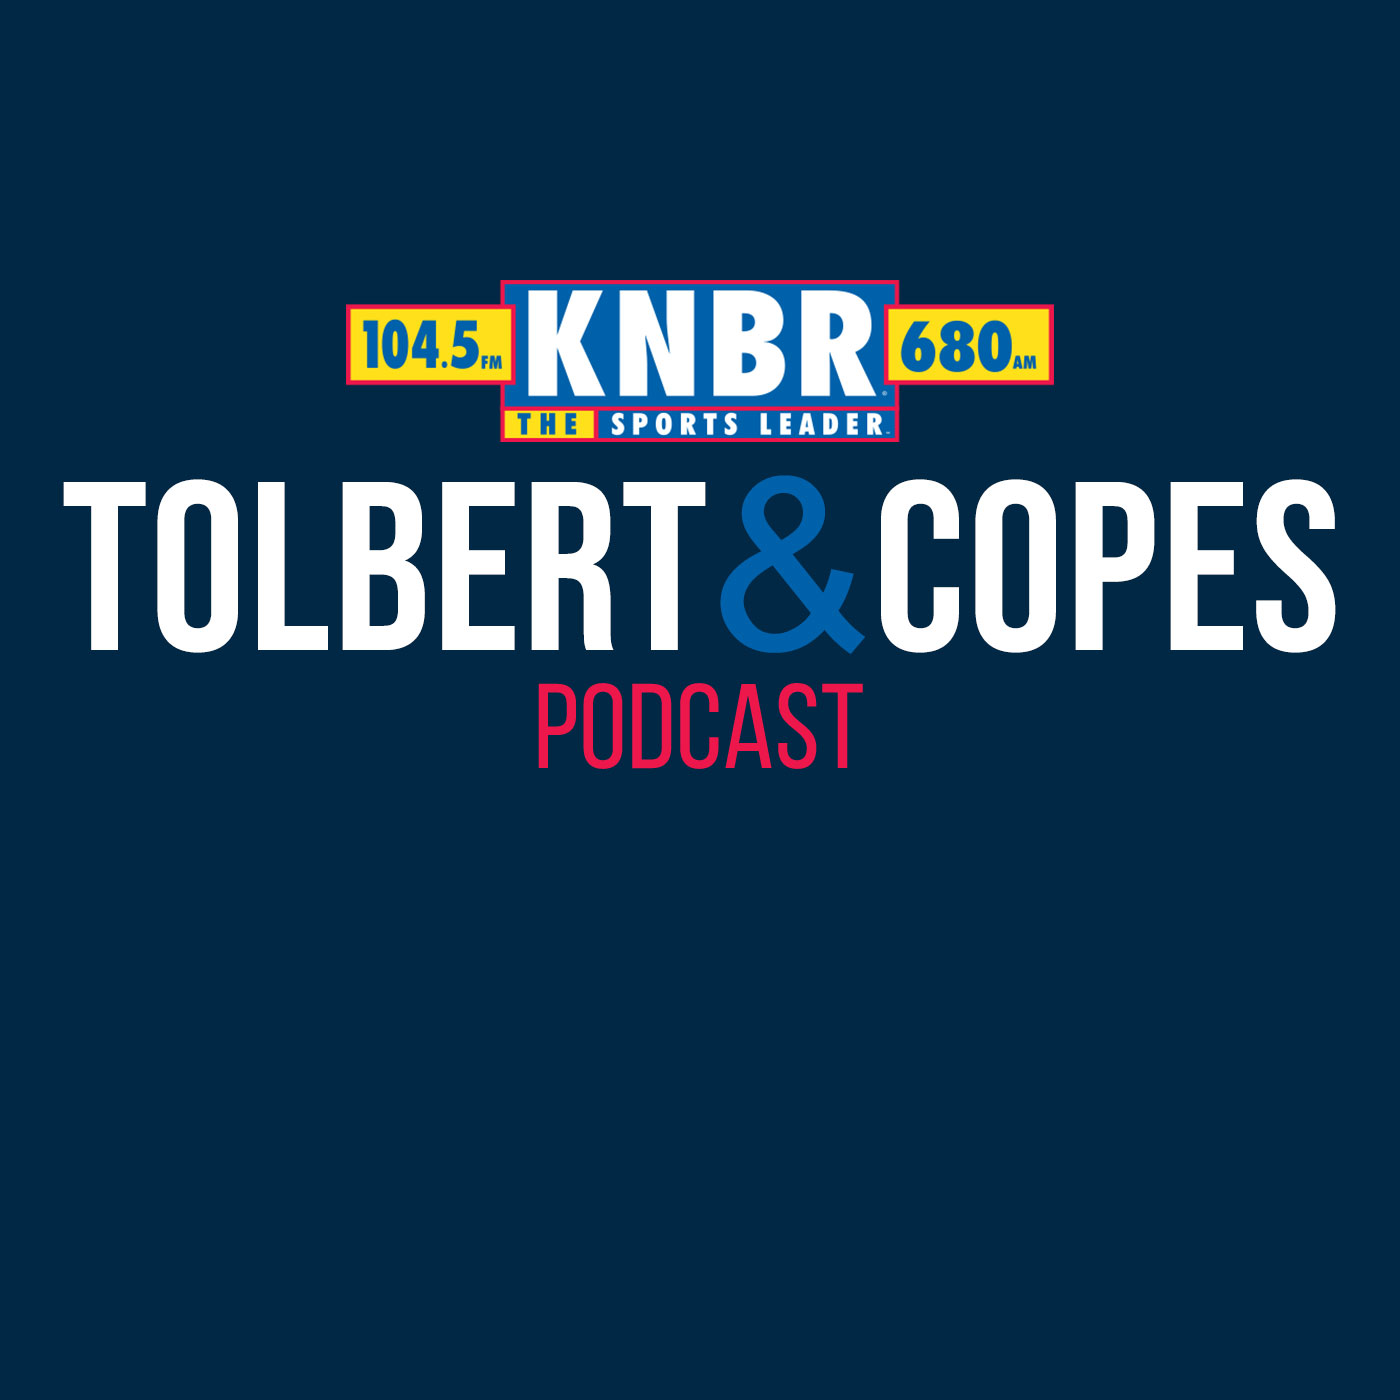 7-29 Tolbert & Copes Hour 1: Should the Giants Buy, Sell or Stand Pat at the Trade Deadline?